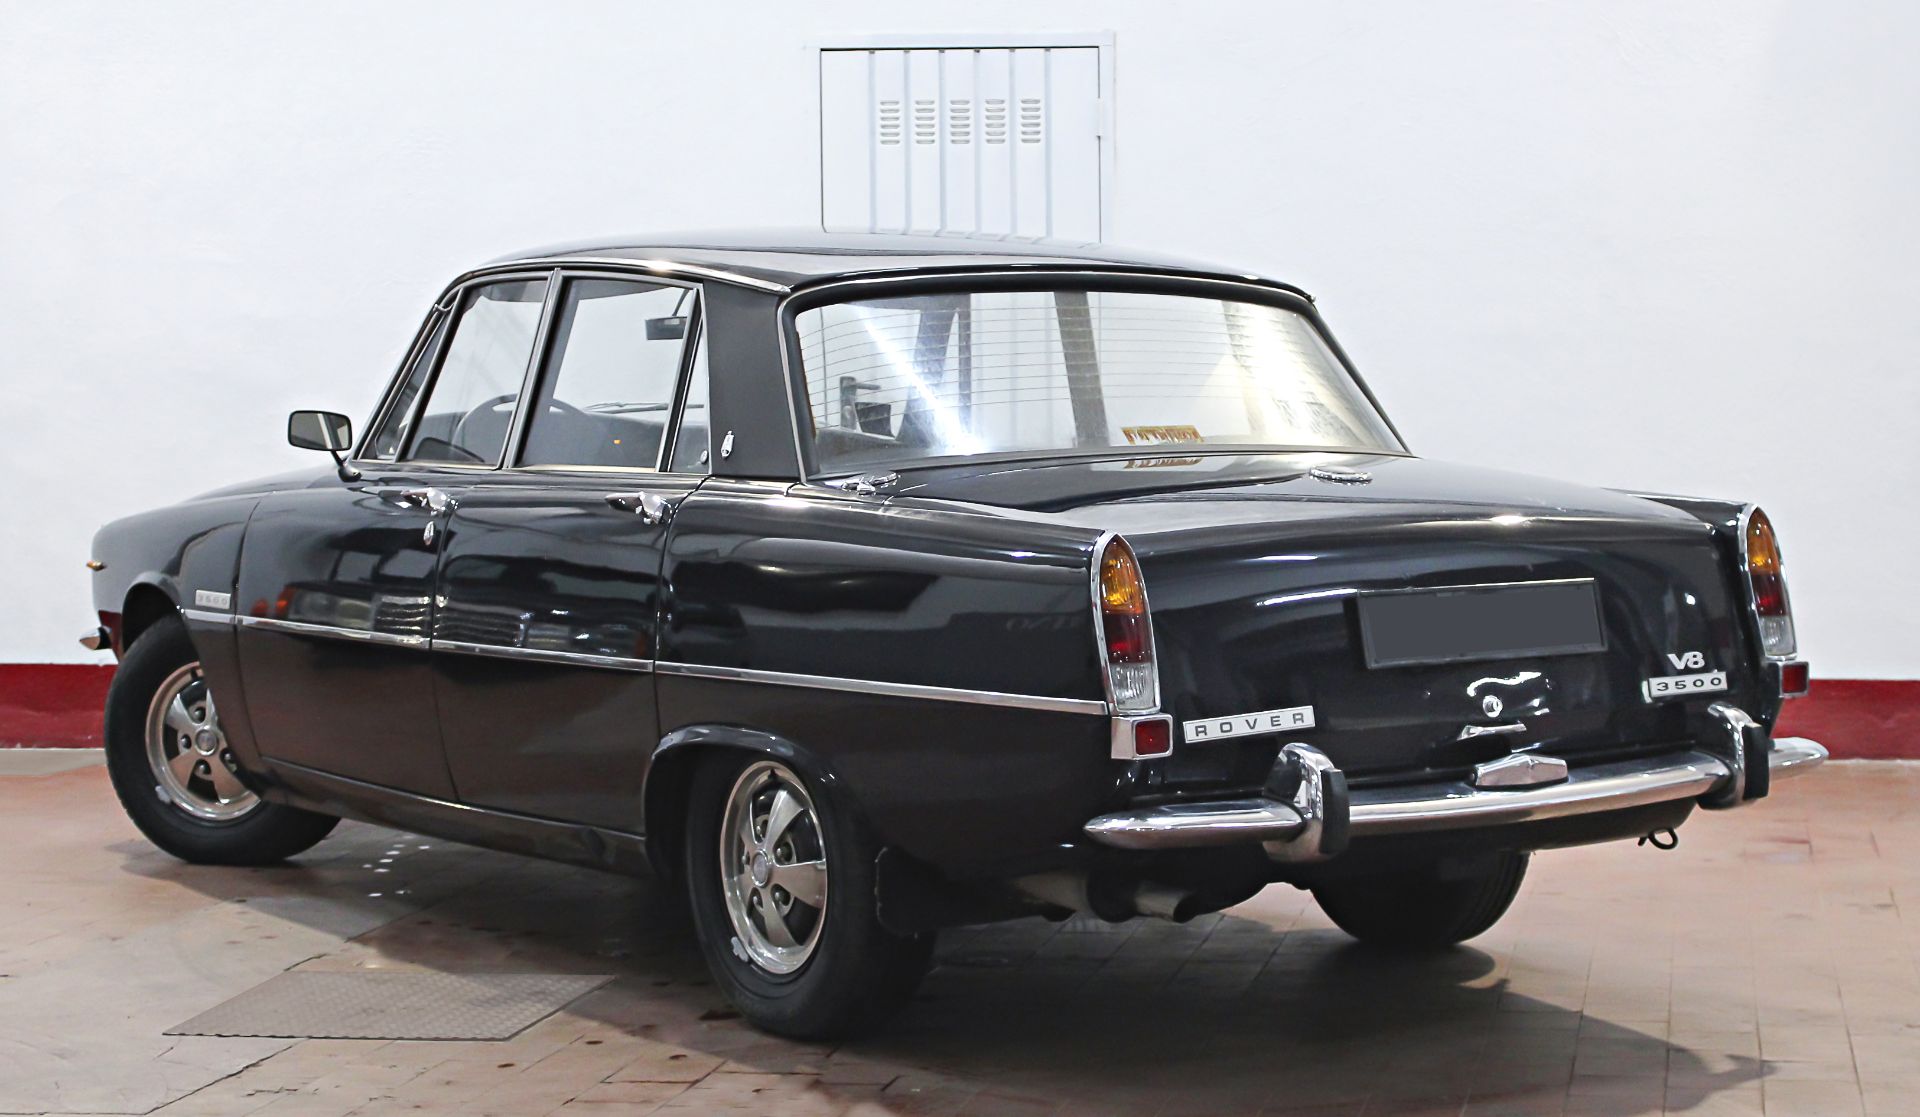 ROVER P6 3500 - Image 2 of 3